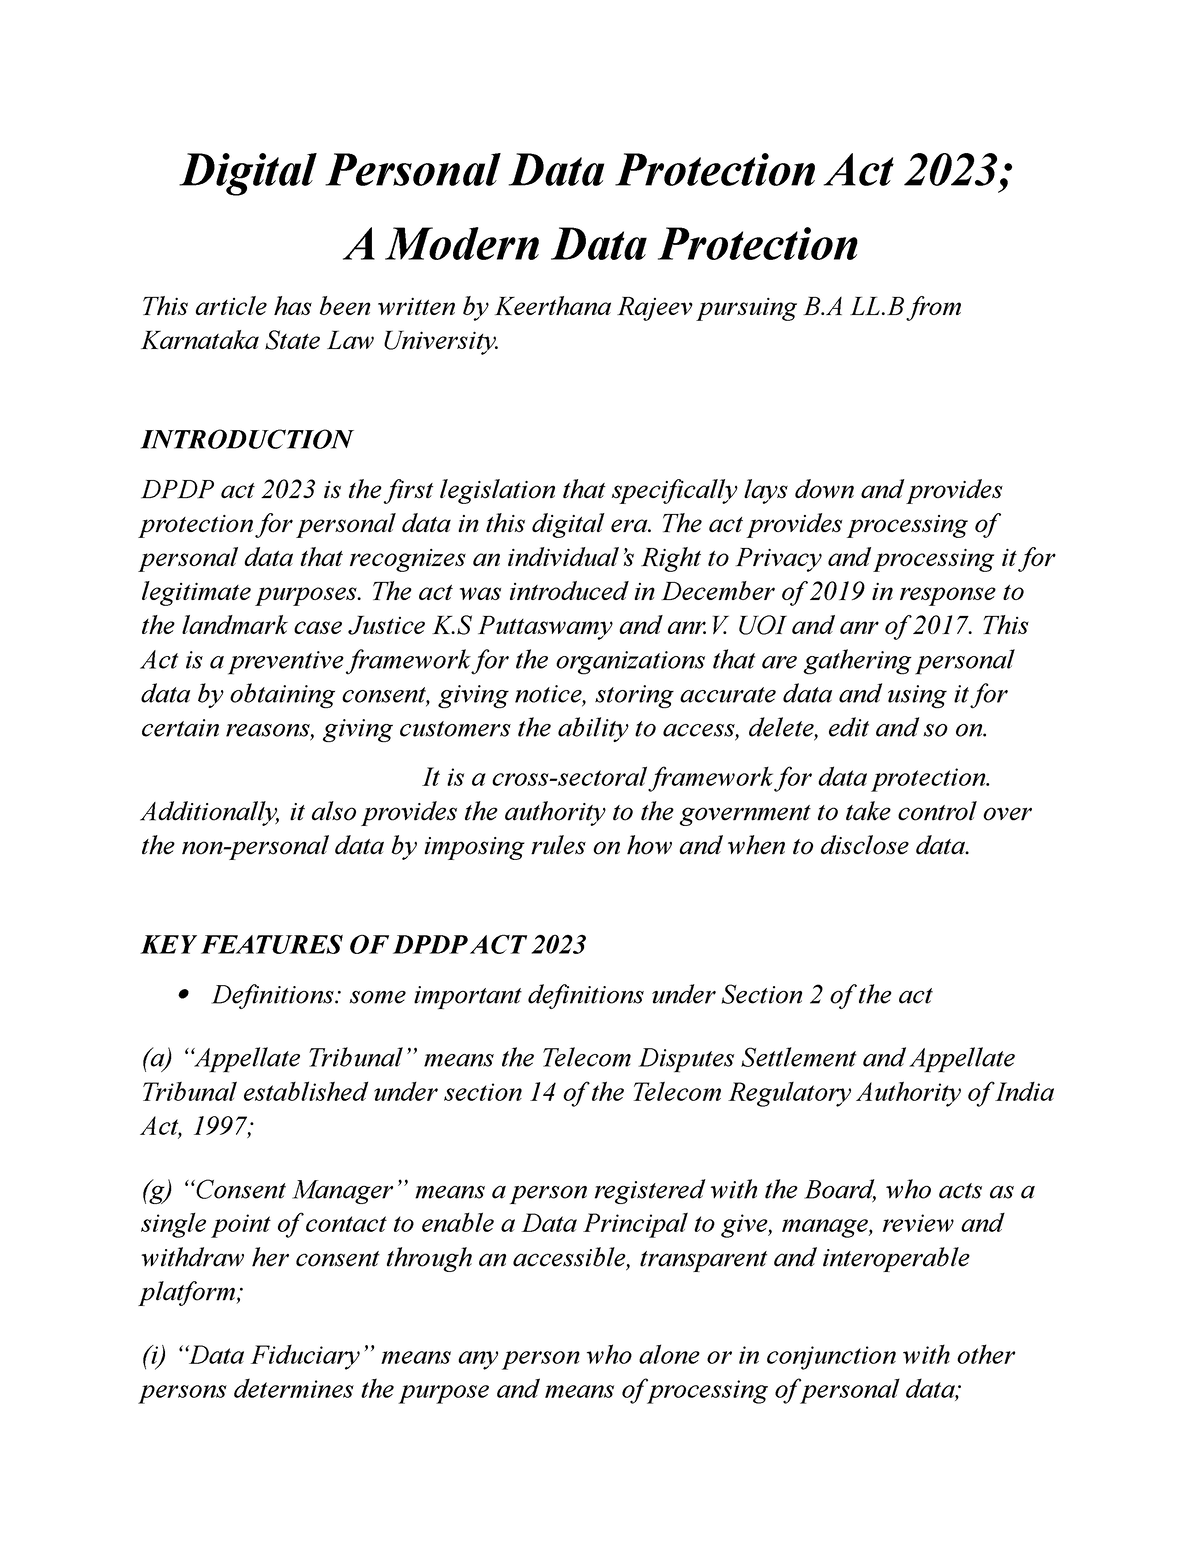 Digital Personal Data Protection Act 2023 Introduction Dpdp Act 2023 Is The First Legislation 0622